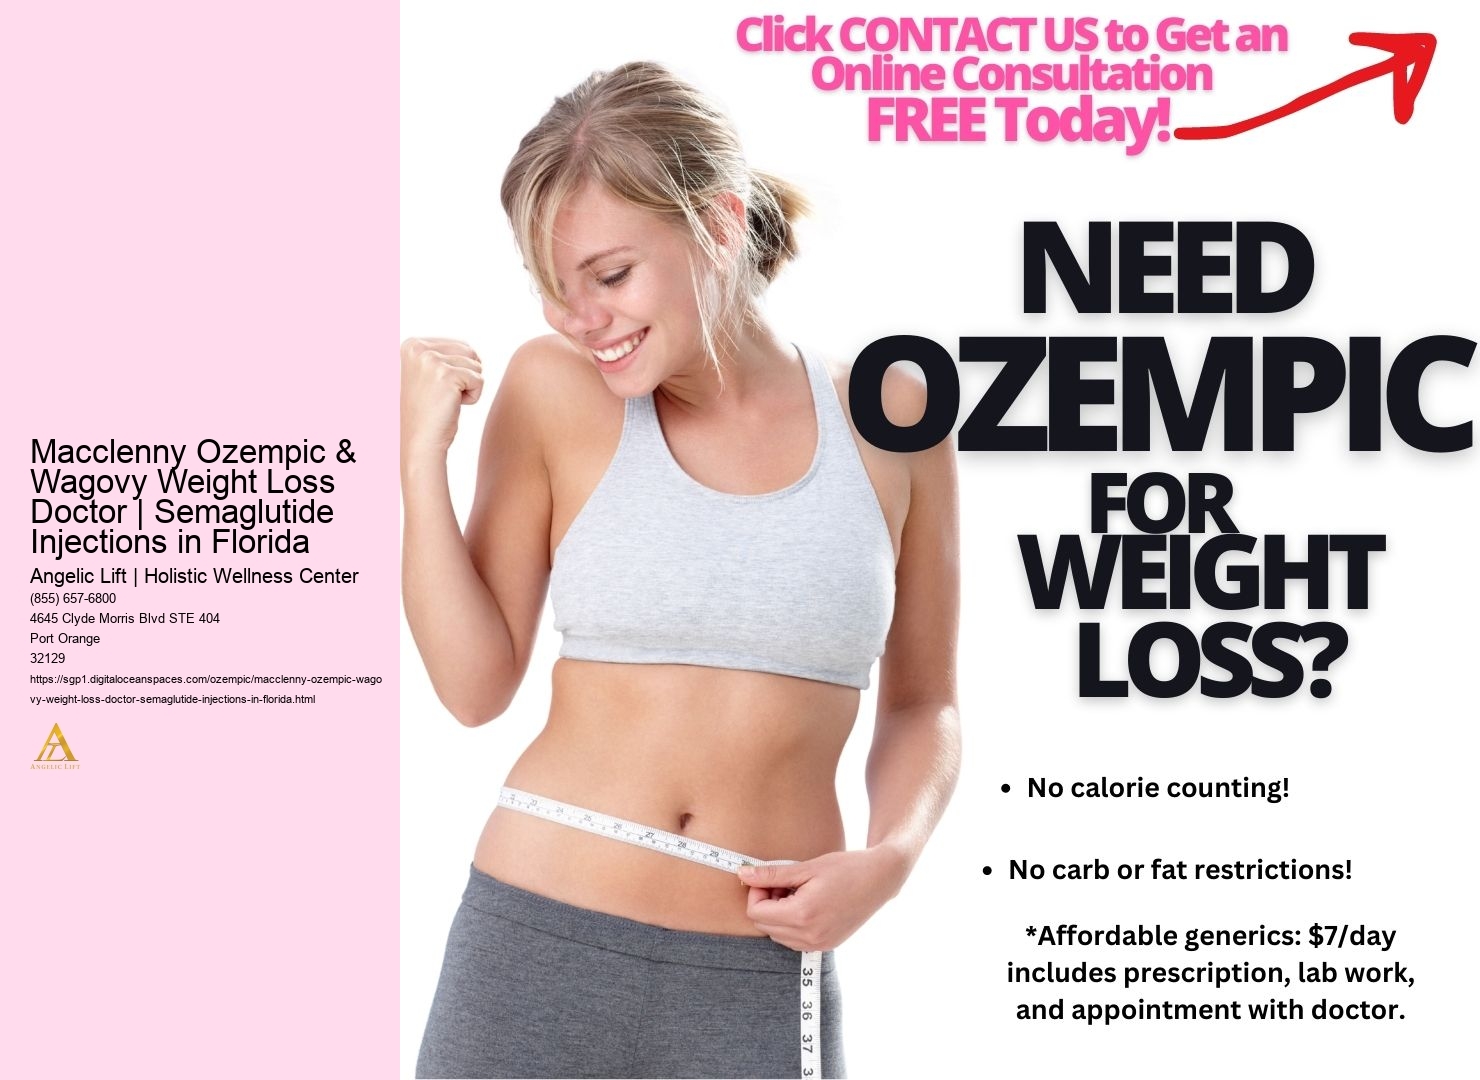 Macclenny Ozempic & Wagovy Weight Loss Doctor | Semaglutide Injections in Florida